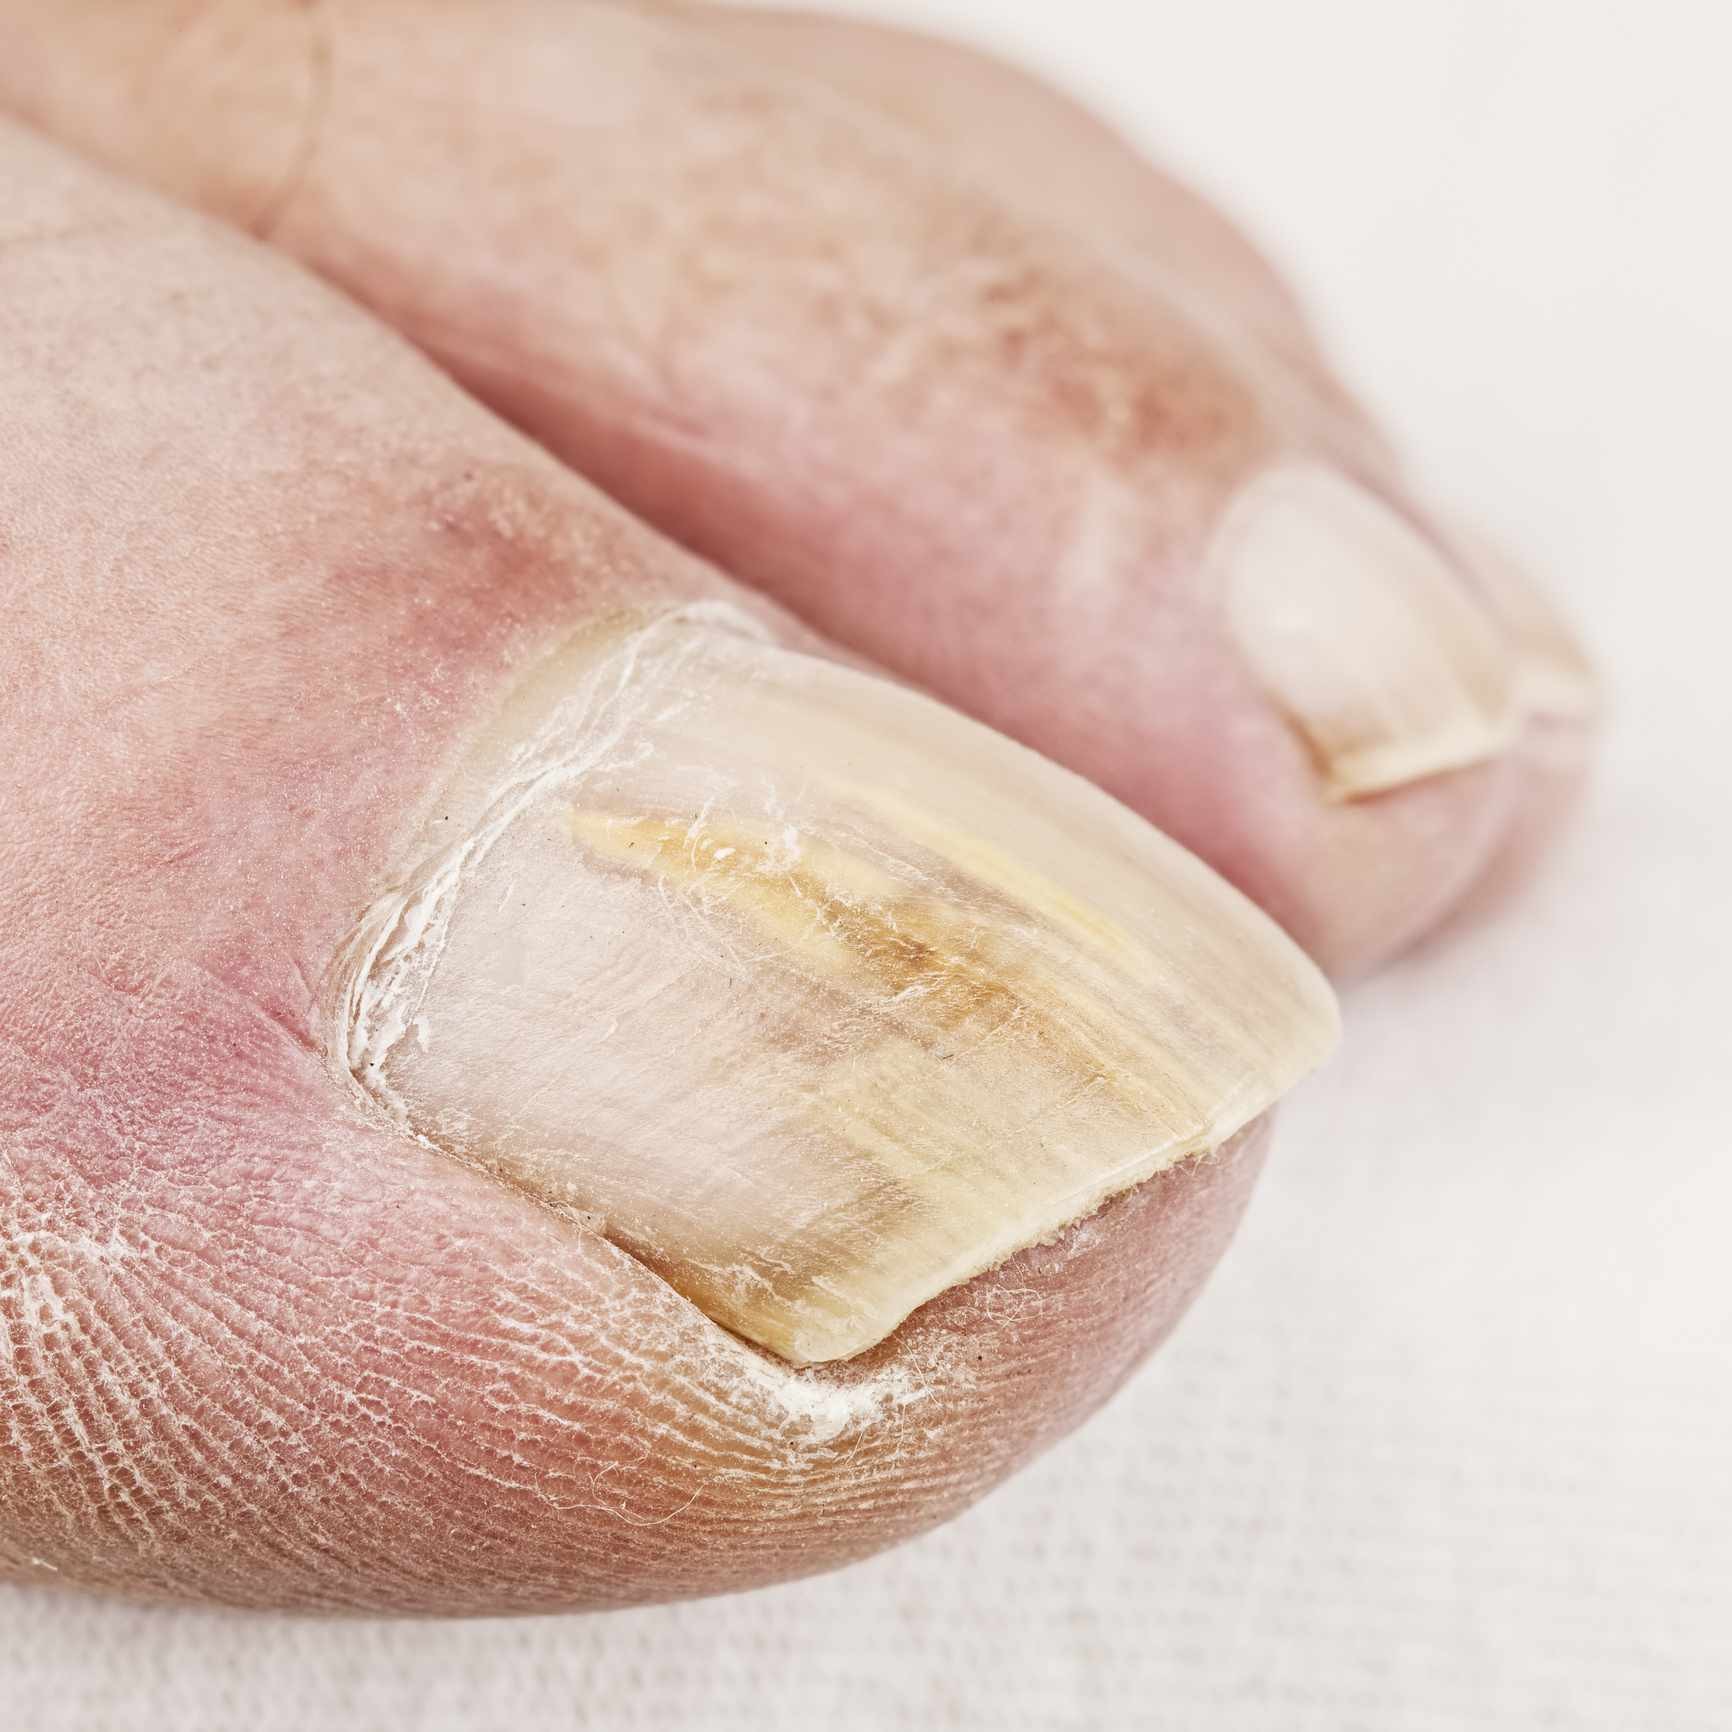 Fungal Nail infection: How does it occur? | Los Gatos, CA Patch